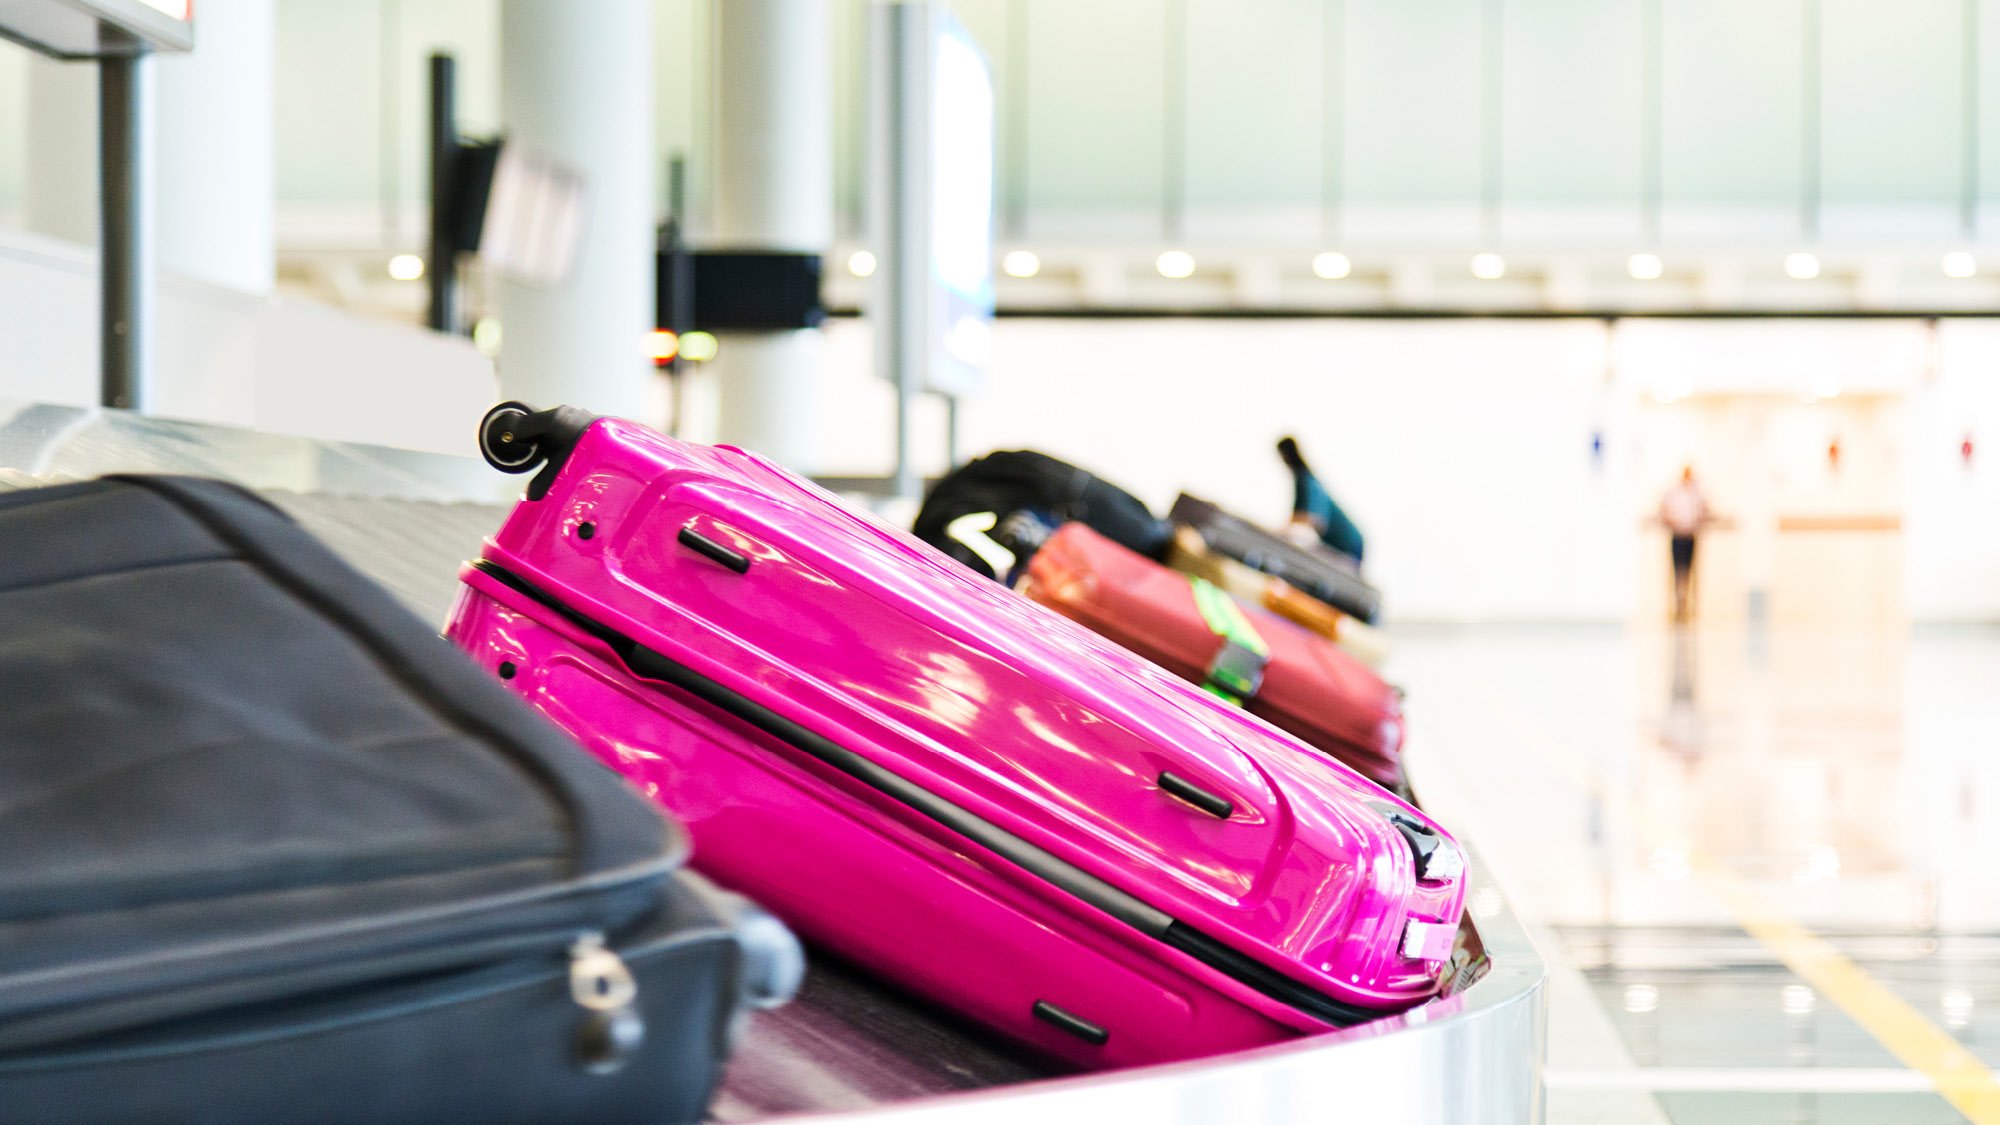 Suitcases and luggage on a carousel at an airport